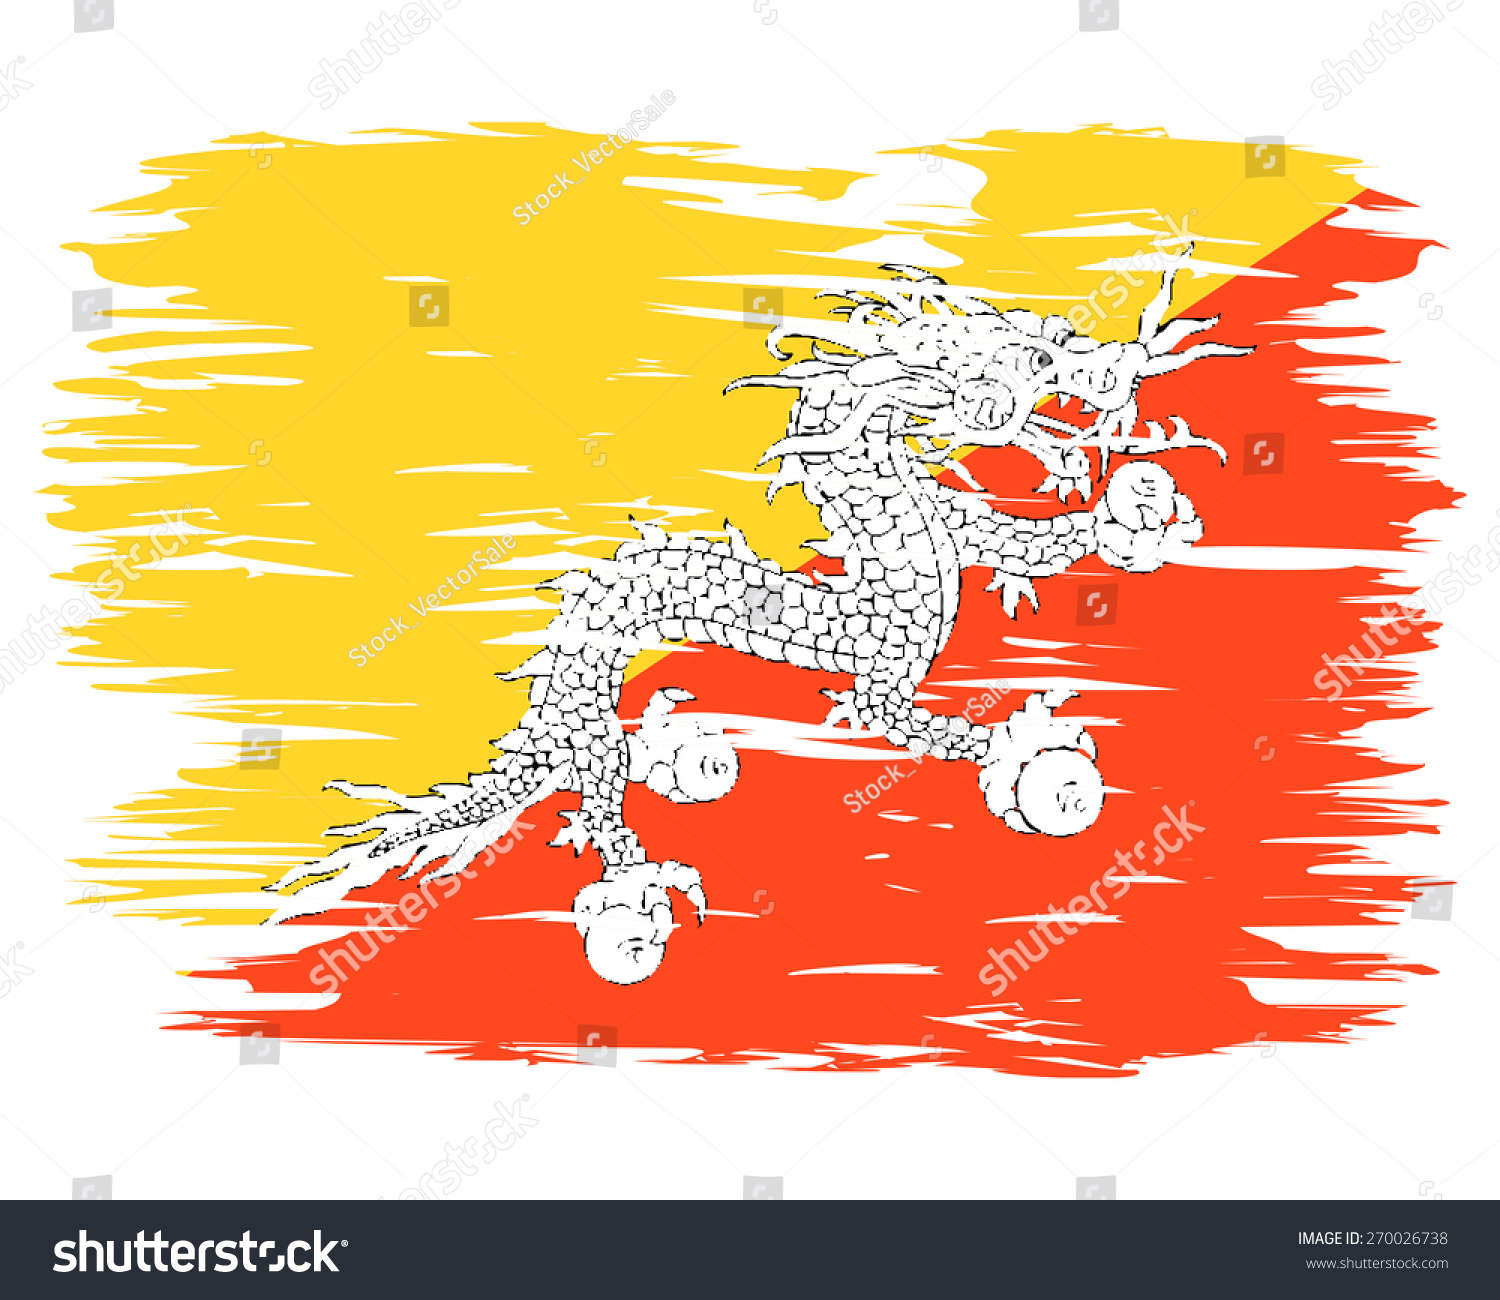 Flag Bhutan Painted Brush Colored Inks Stock Vector 270026738 ...